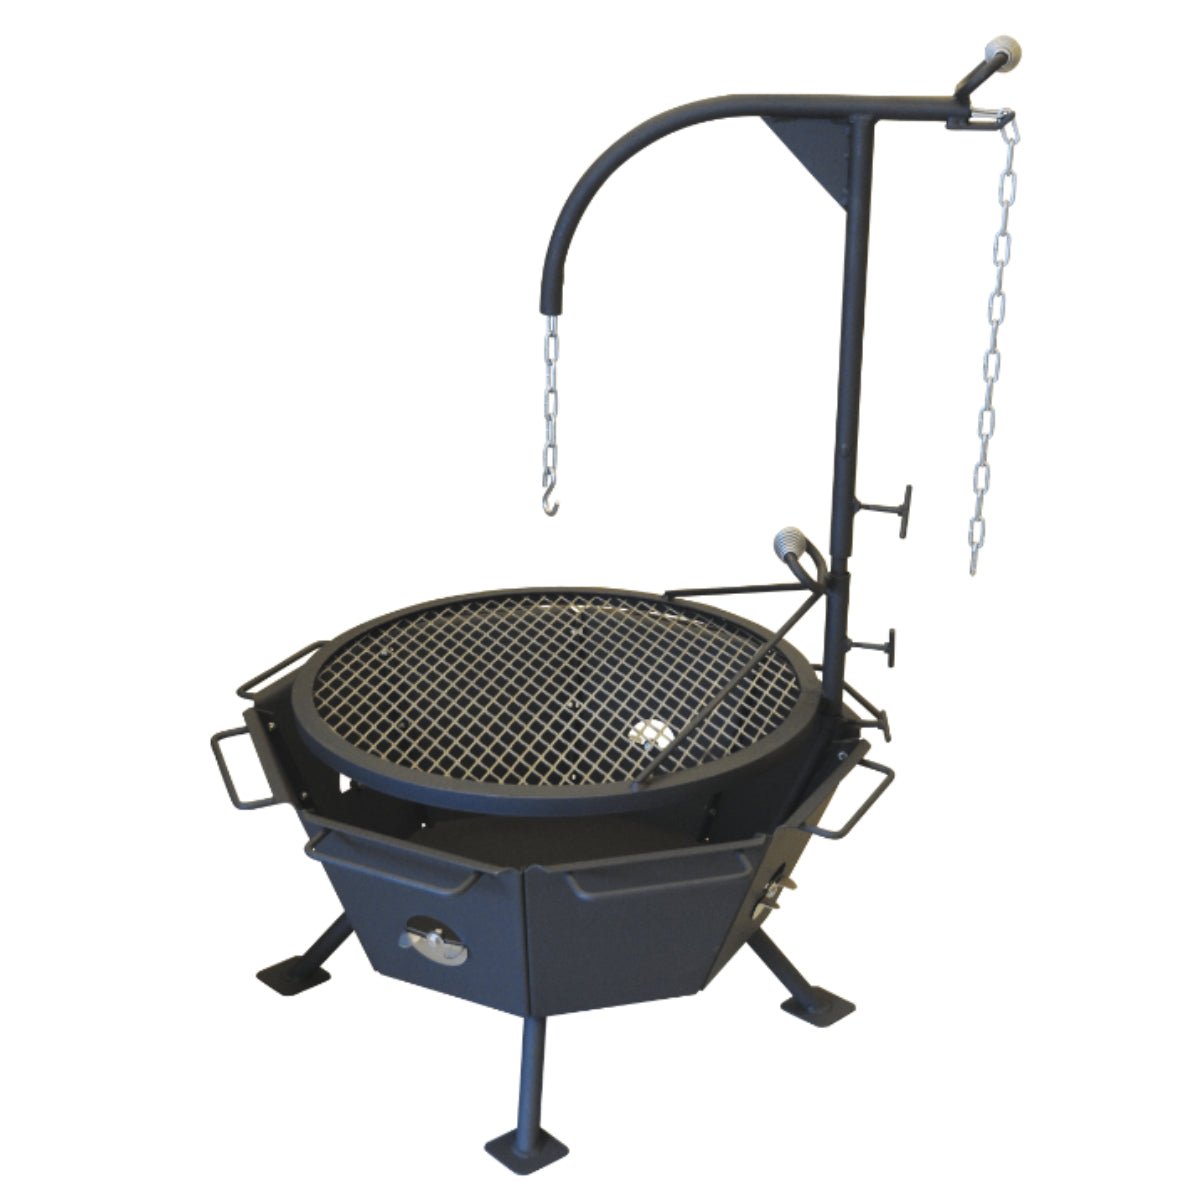 Backyard Fire Pit with Kettle Hook - 13 Moons